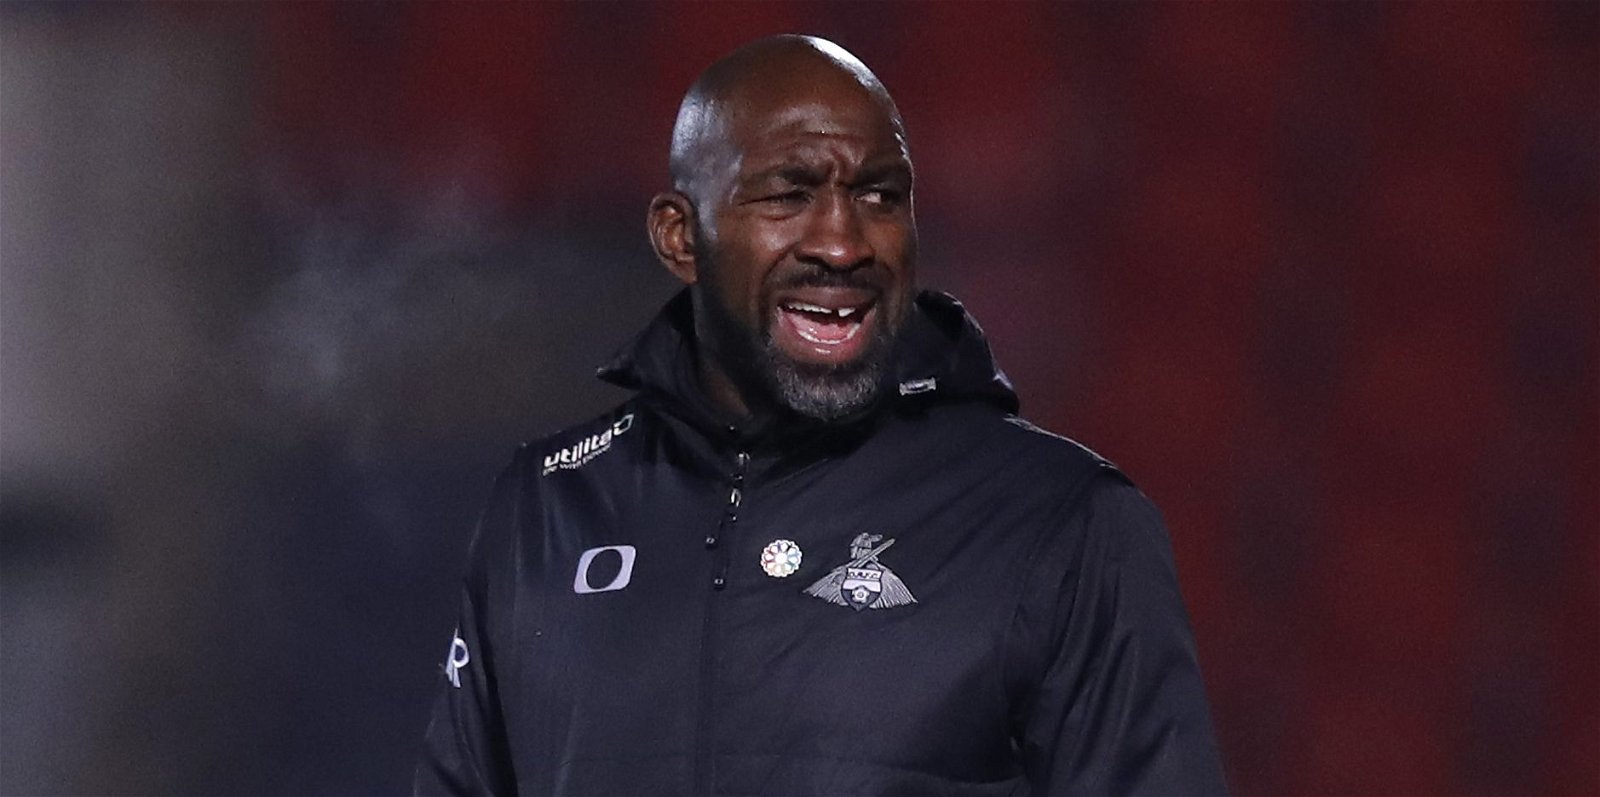 Doncaster Rovers, ‘I hope in their hearts they understand’ – Darren Moore’s message to Doncaster Rovers fans